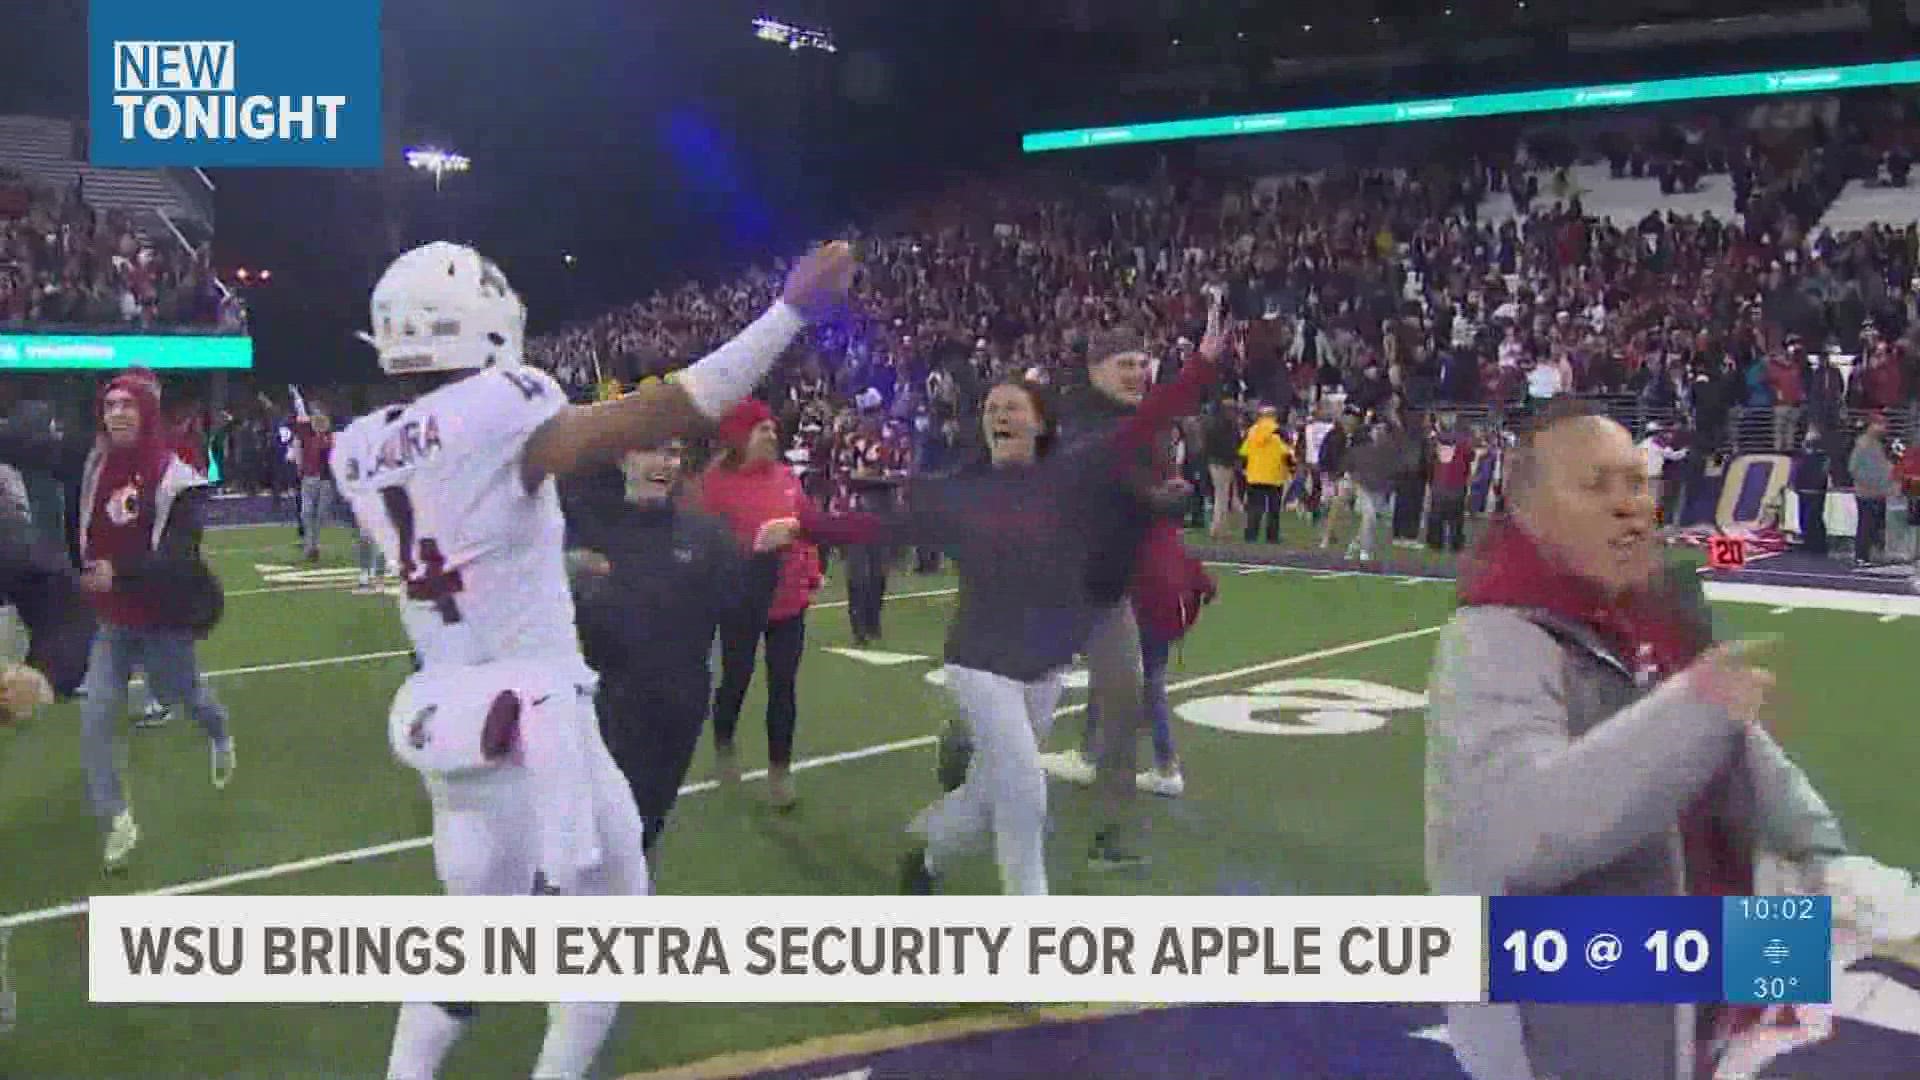 Washington State University says they will be bringing additional resources for the Apple Cup. The game returns to Pullman for the first time since 2018.